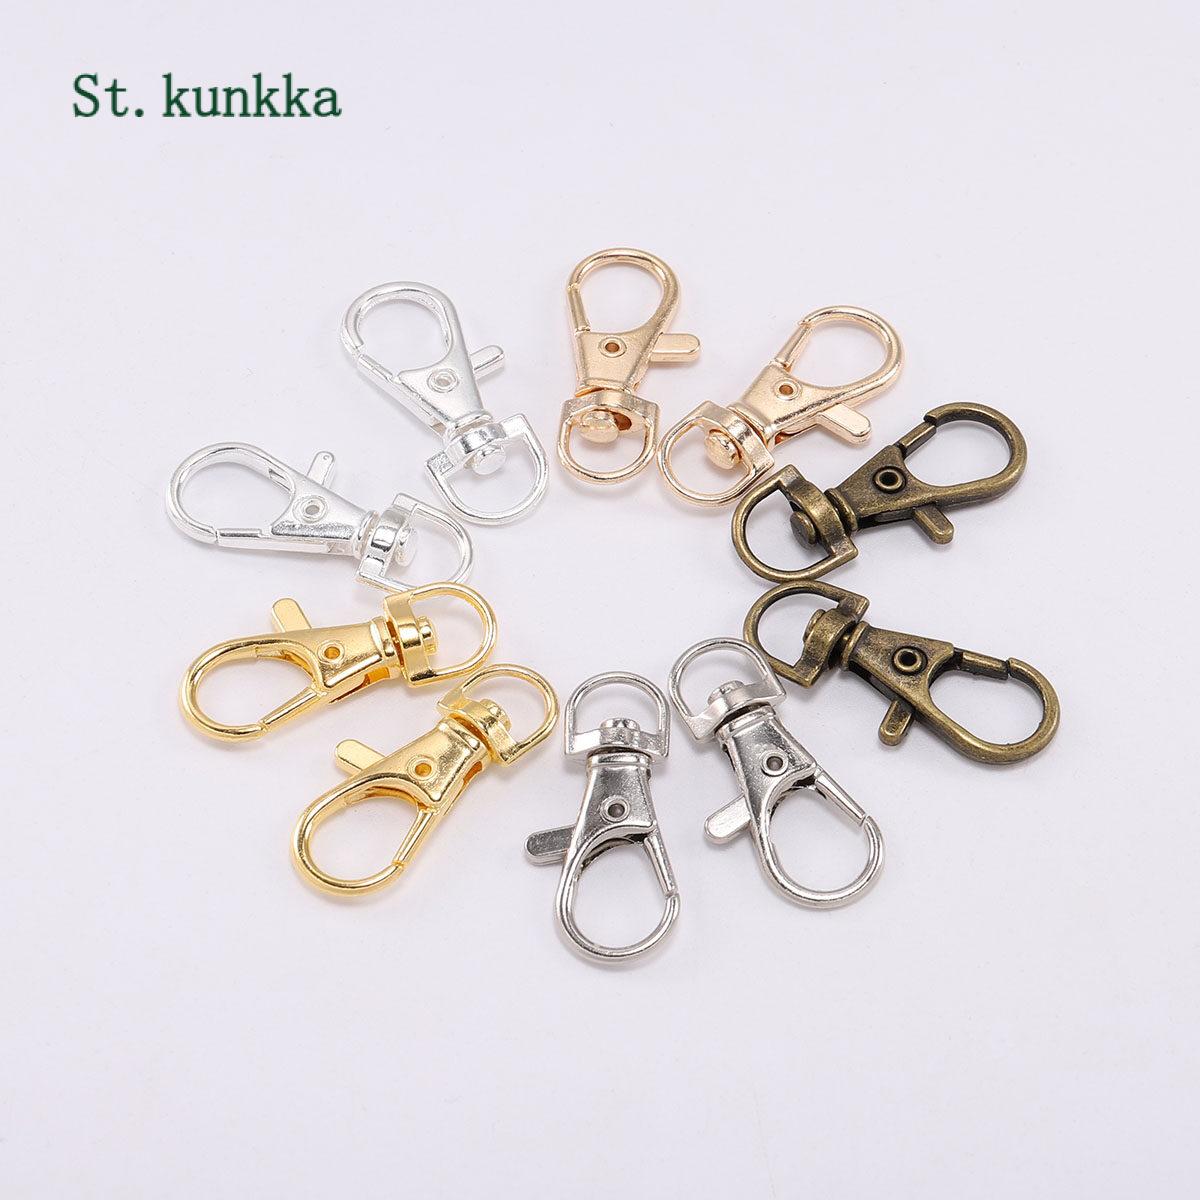 Buy Spring Ring Clasp online